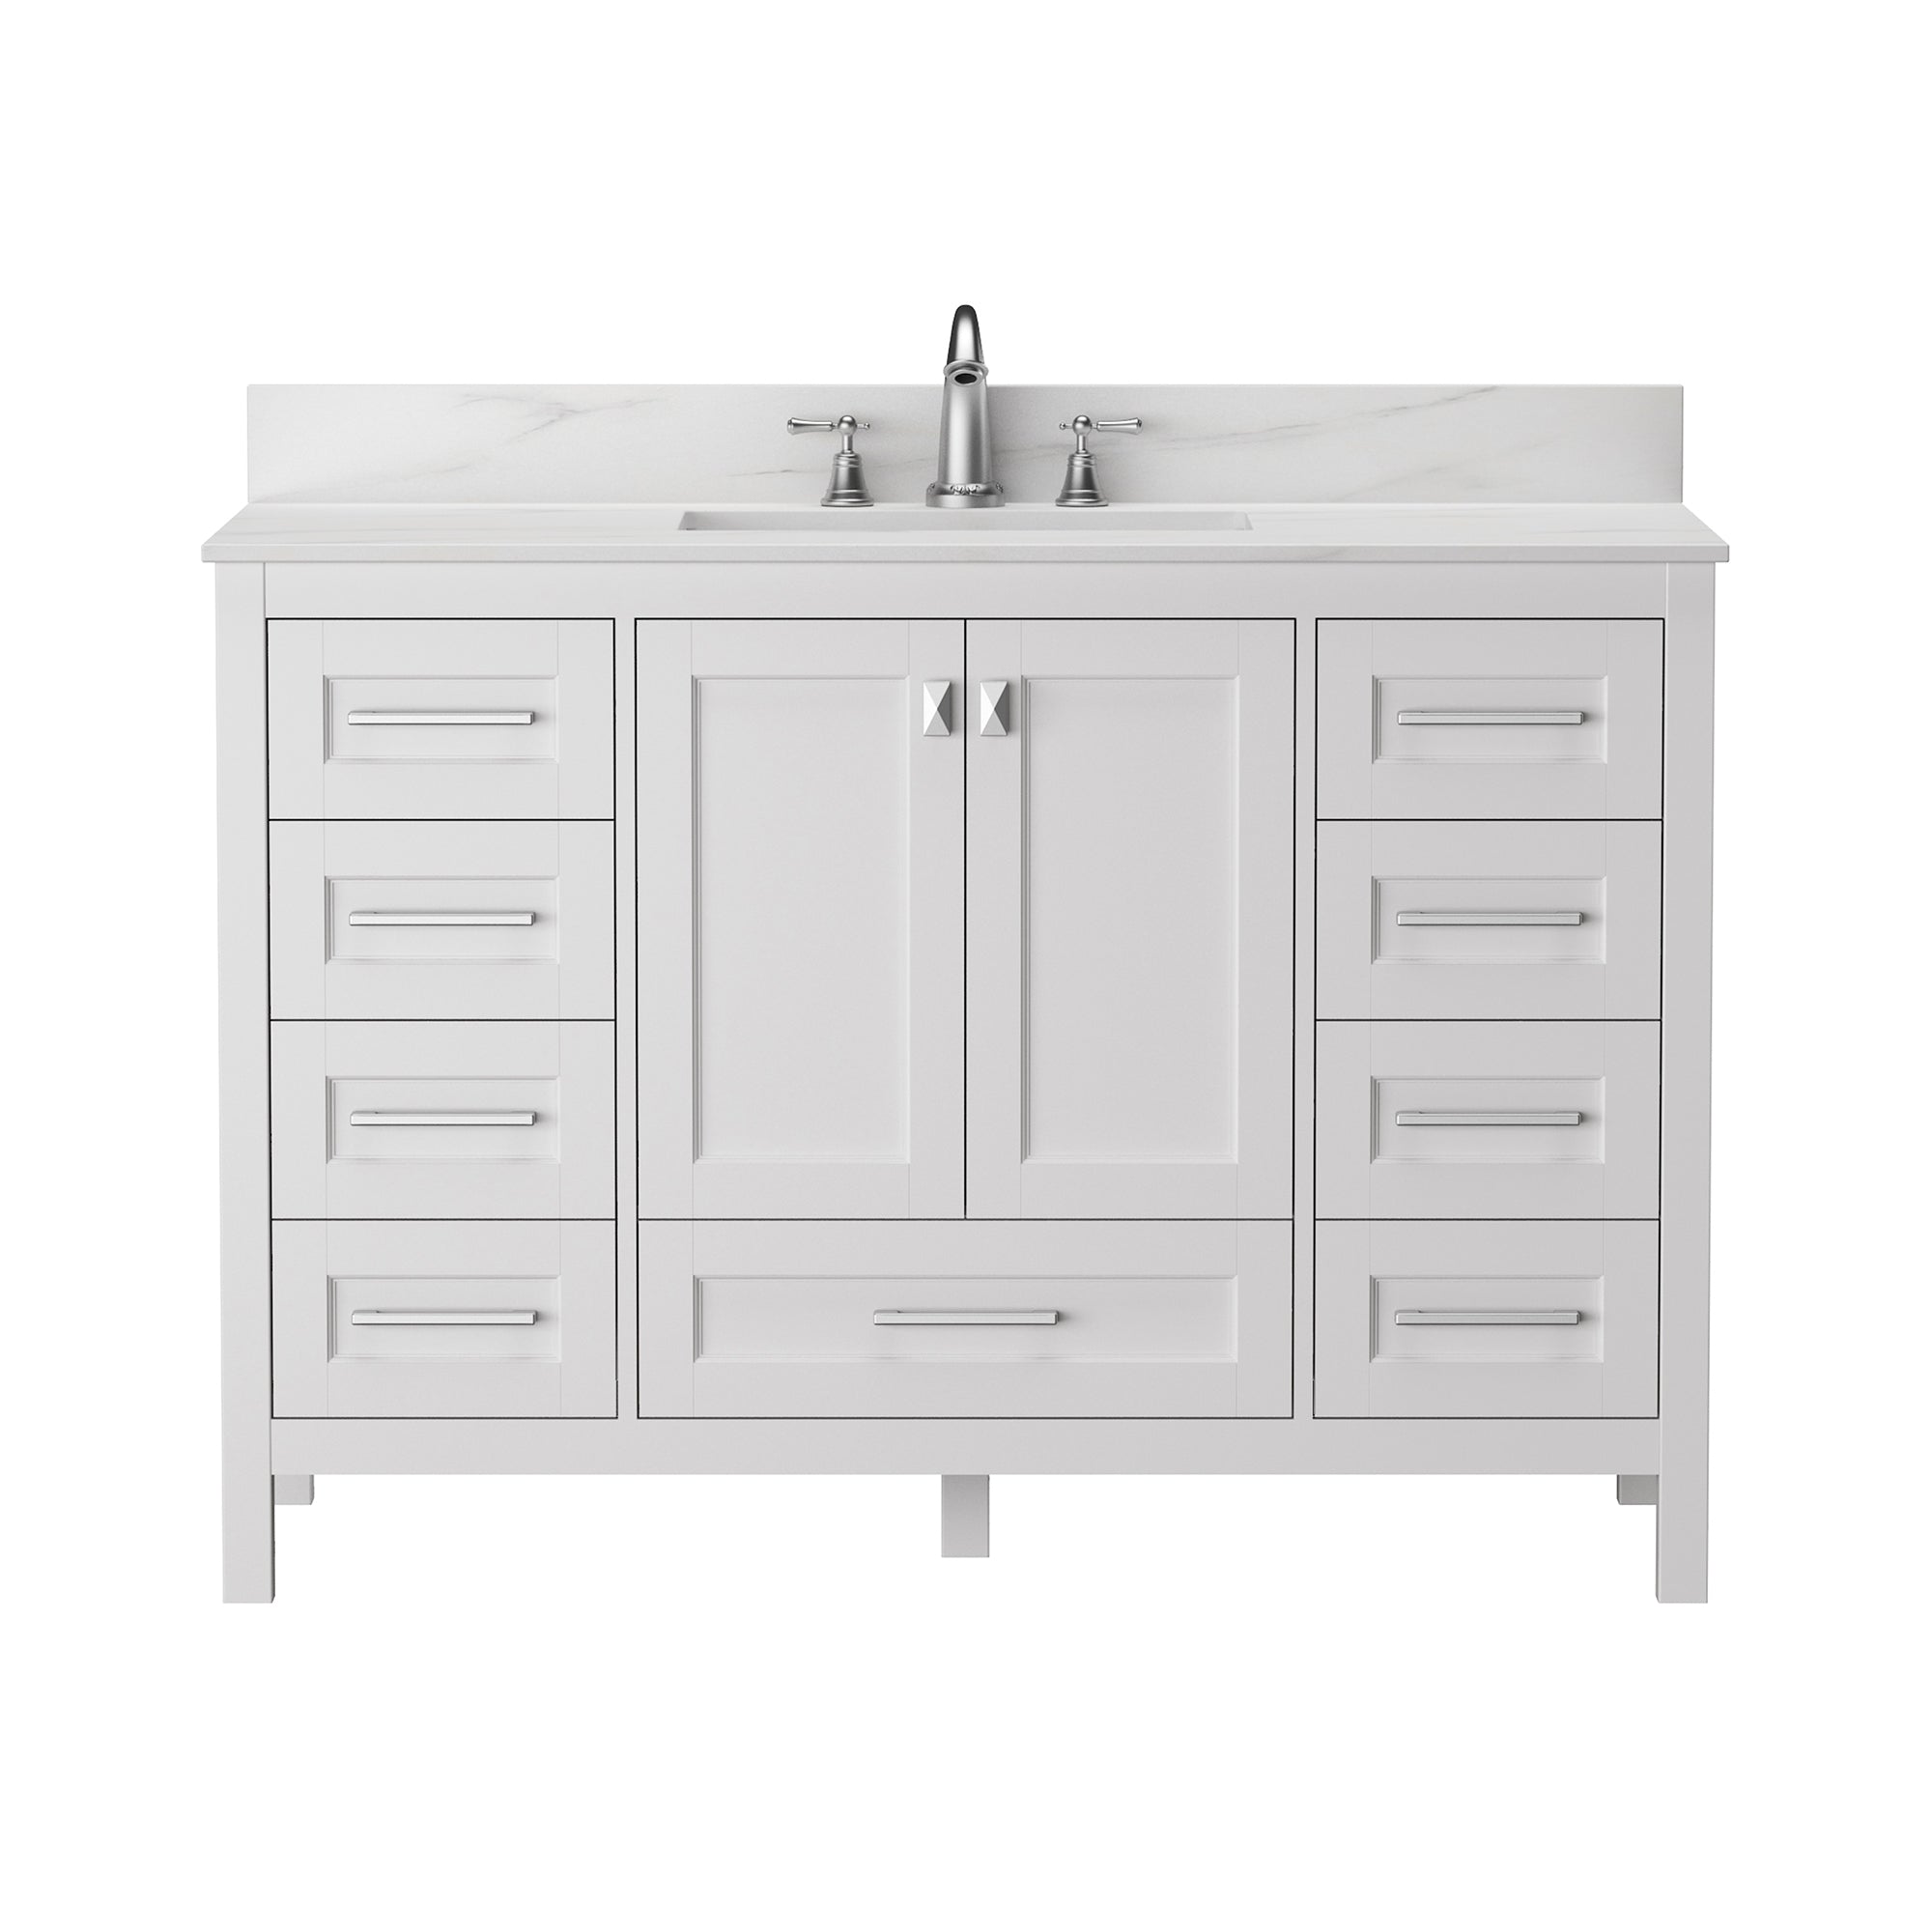 48" Free Standing Single Bathroom Vanity with Natural Marble Top RX-V03-48